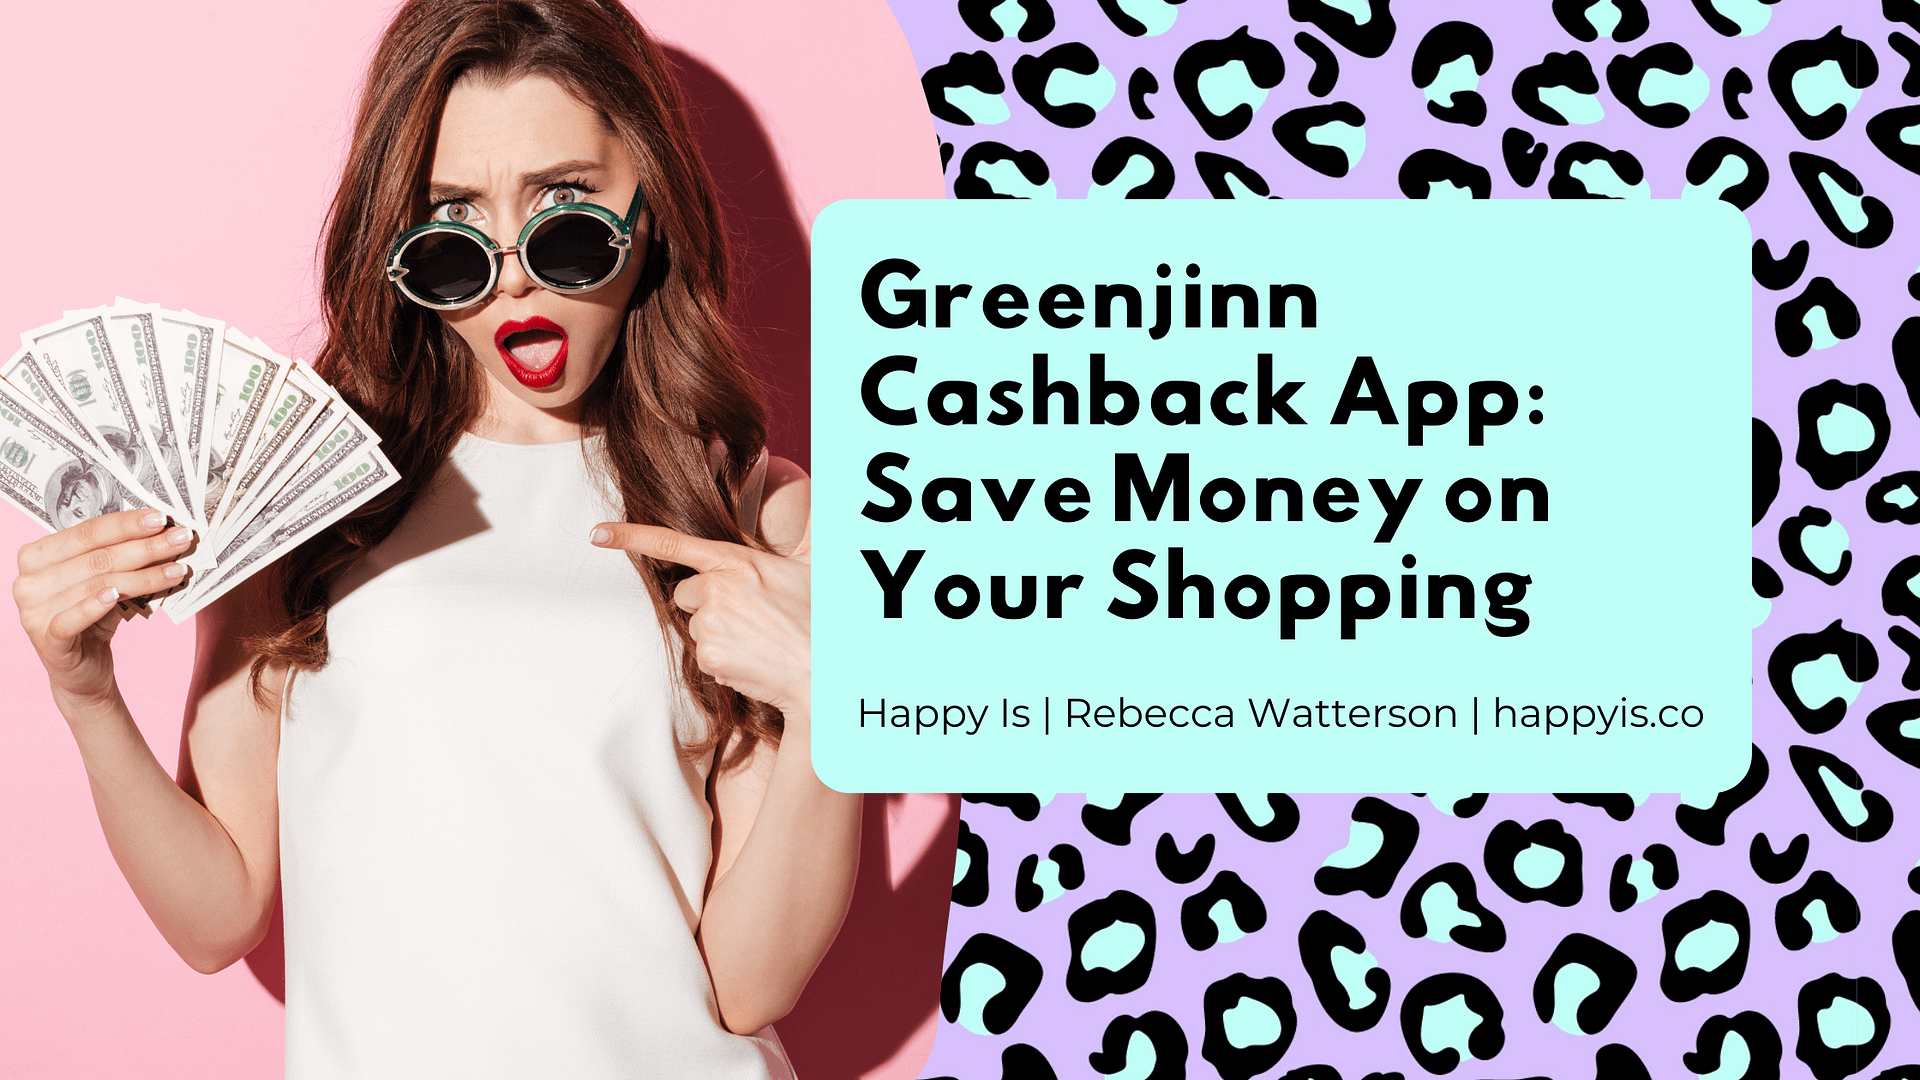 GreenJinn App: Save £100s On Your Shopping With This Supermarket Cashback App